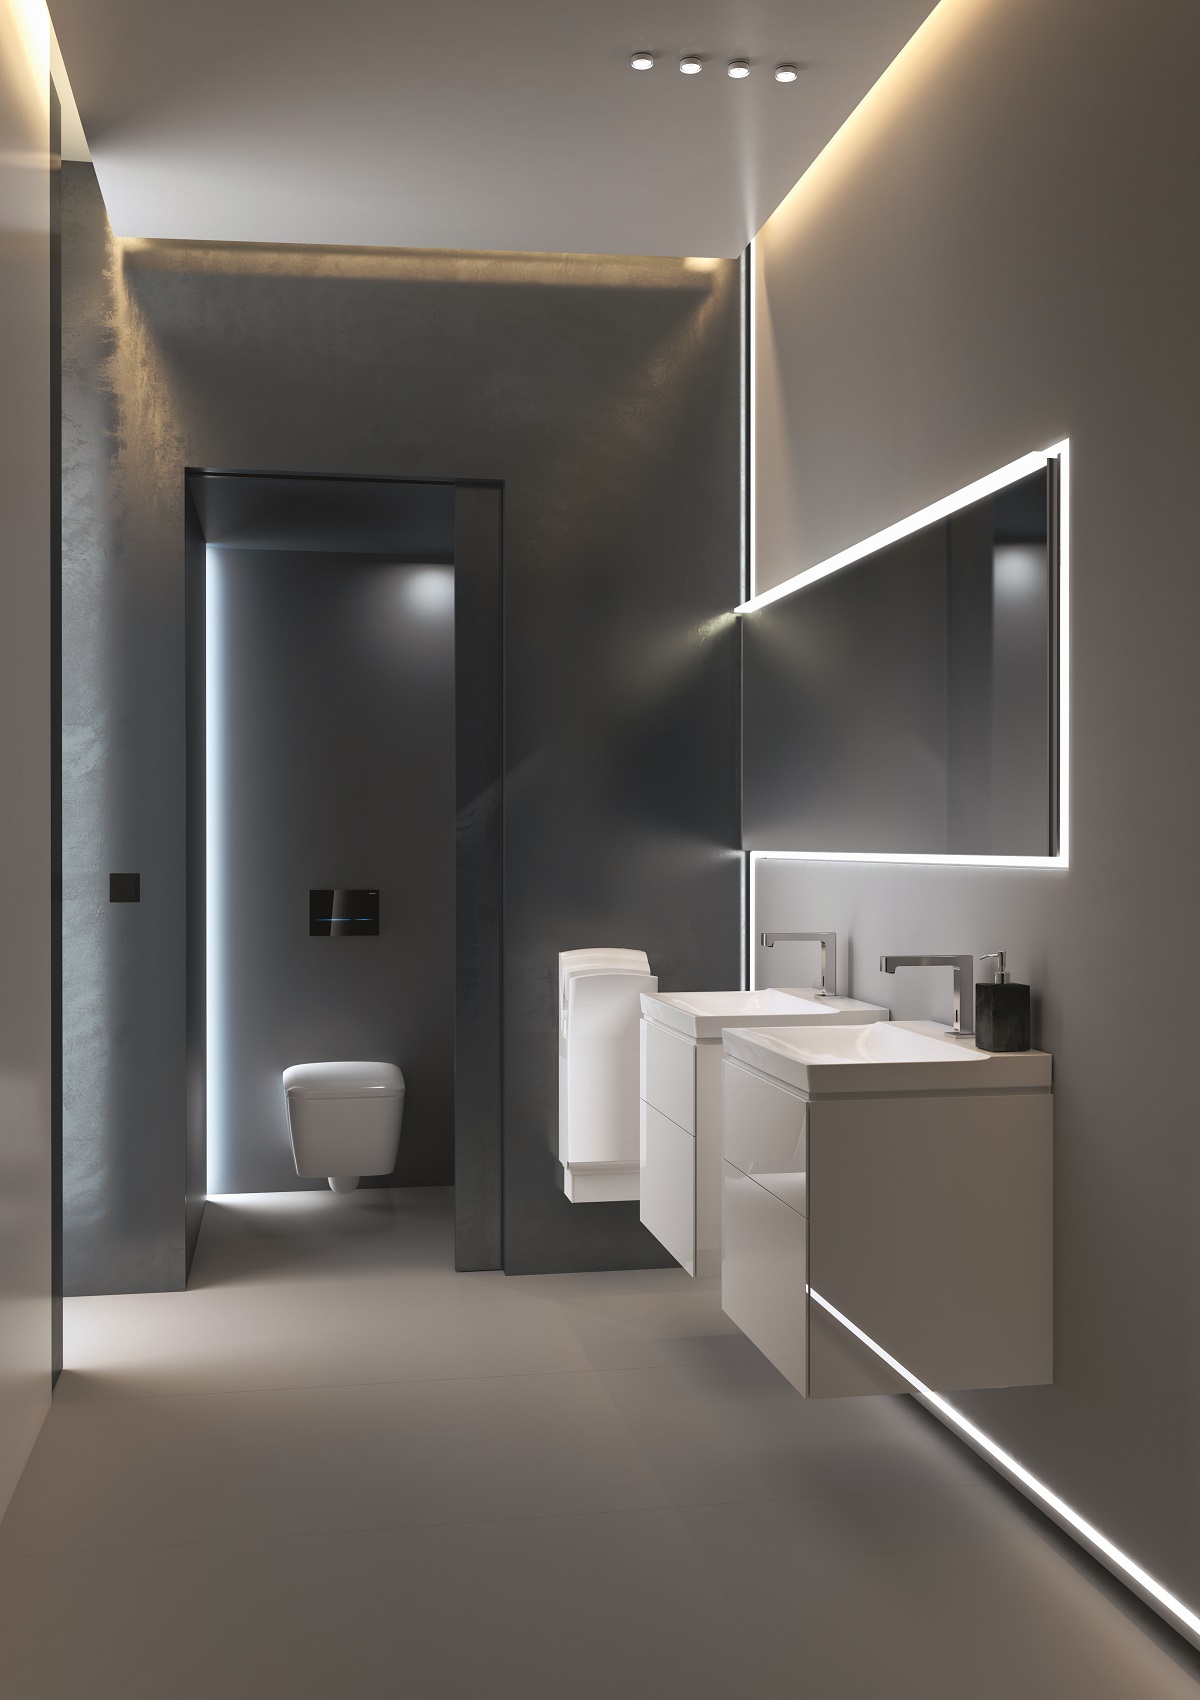 Geberit introduces intuitive technology and lighting to enhance the bathroom